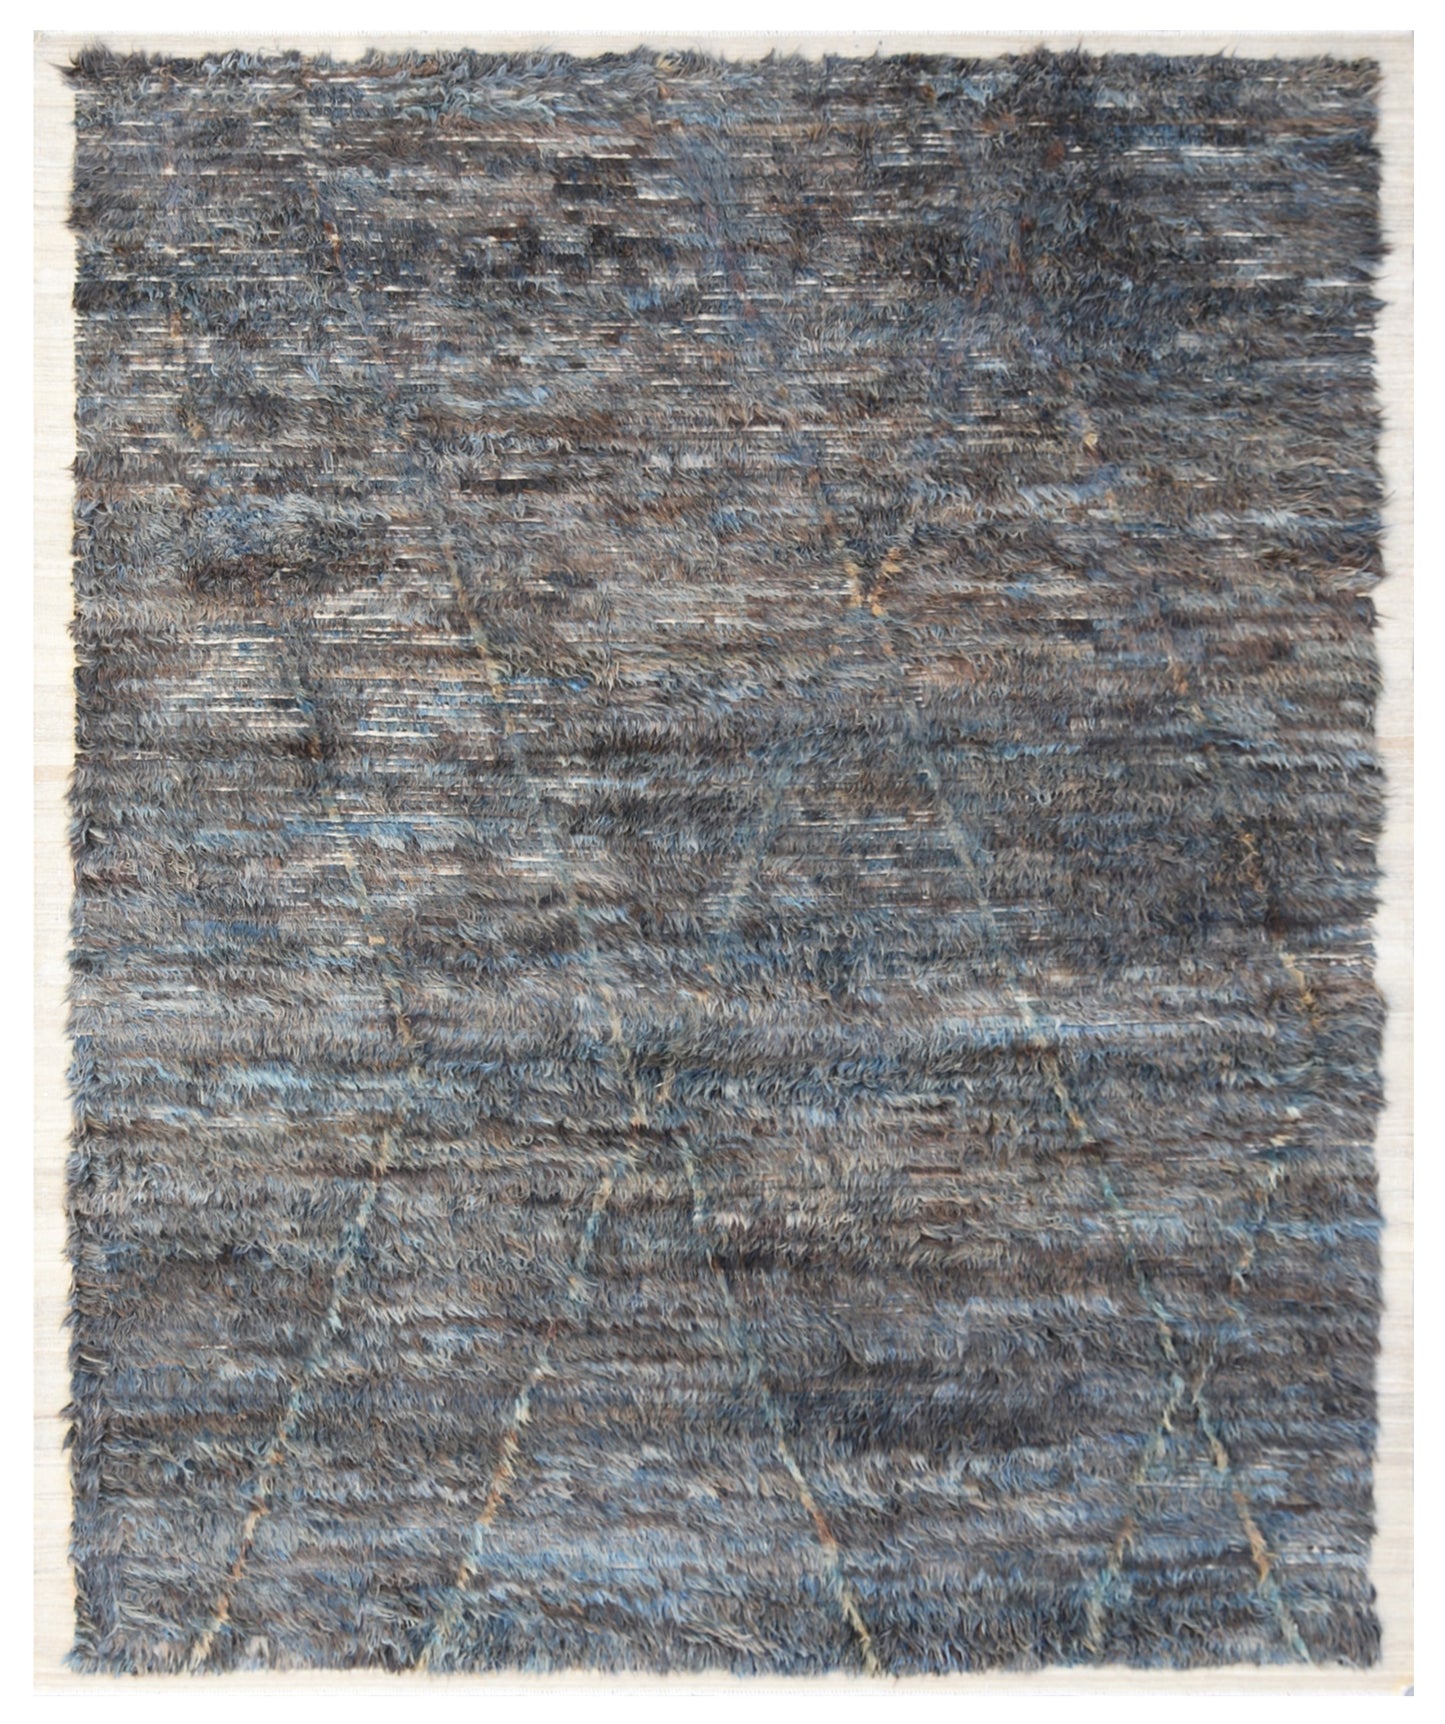 8'x9' Navy Blue and Gray Long Pile Shaggy Moroccan Style Navy Ariana Barchi Area Rug